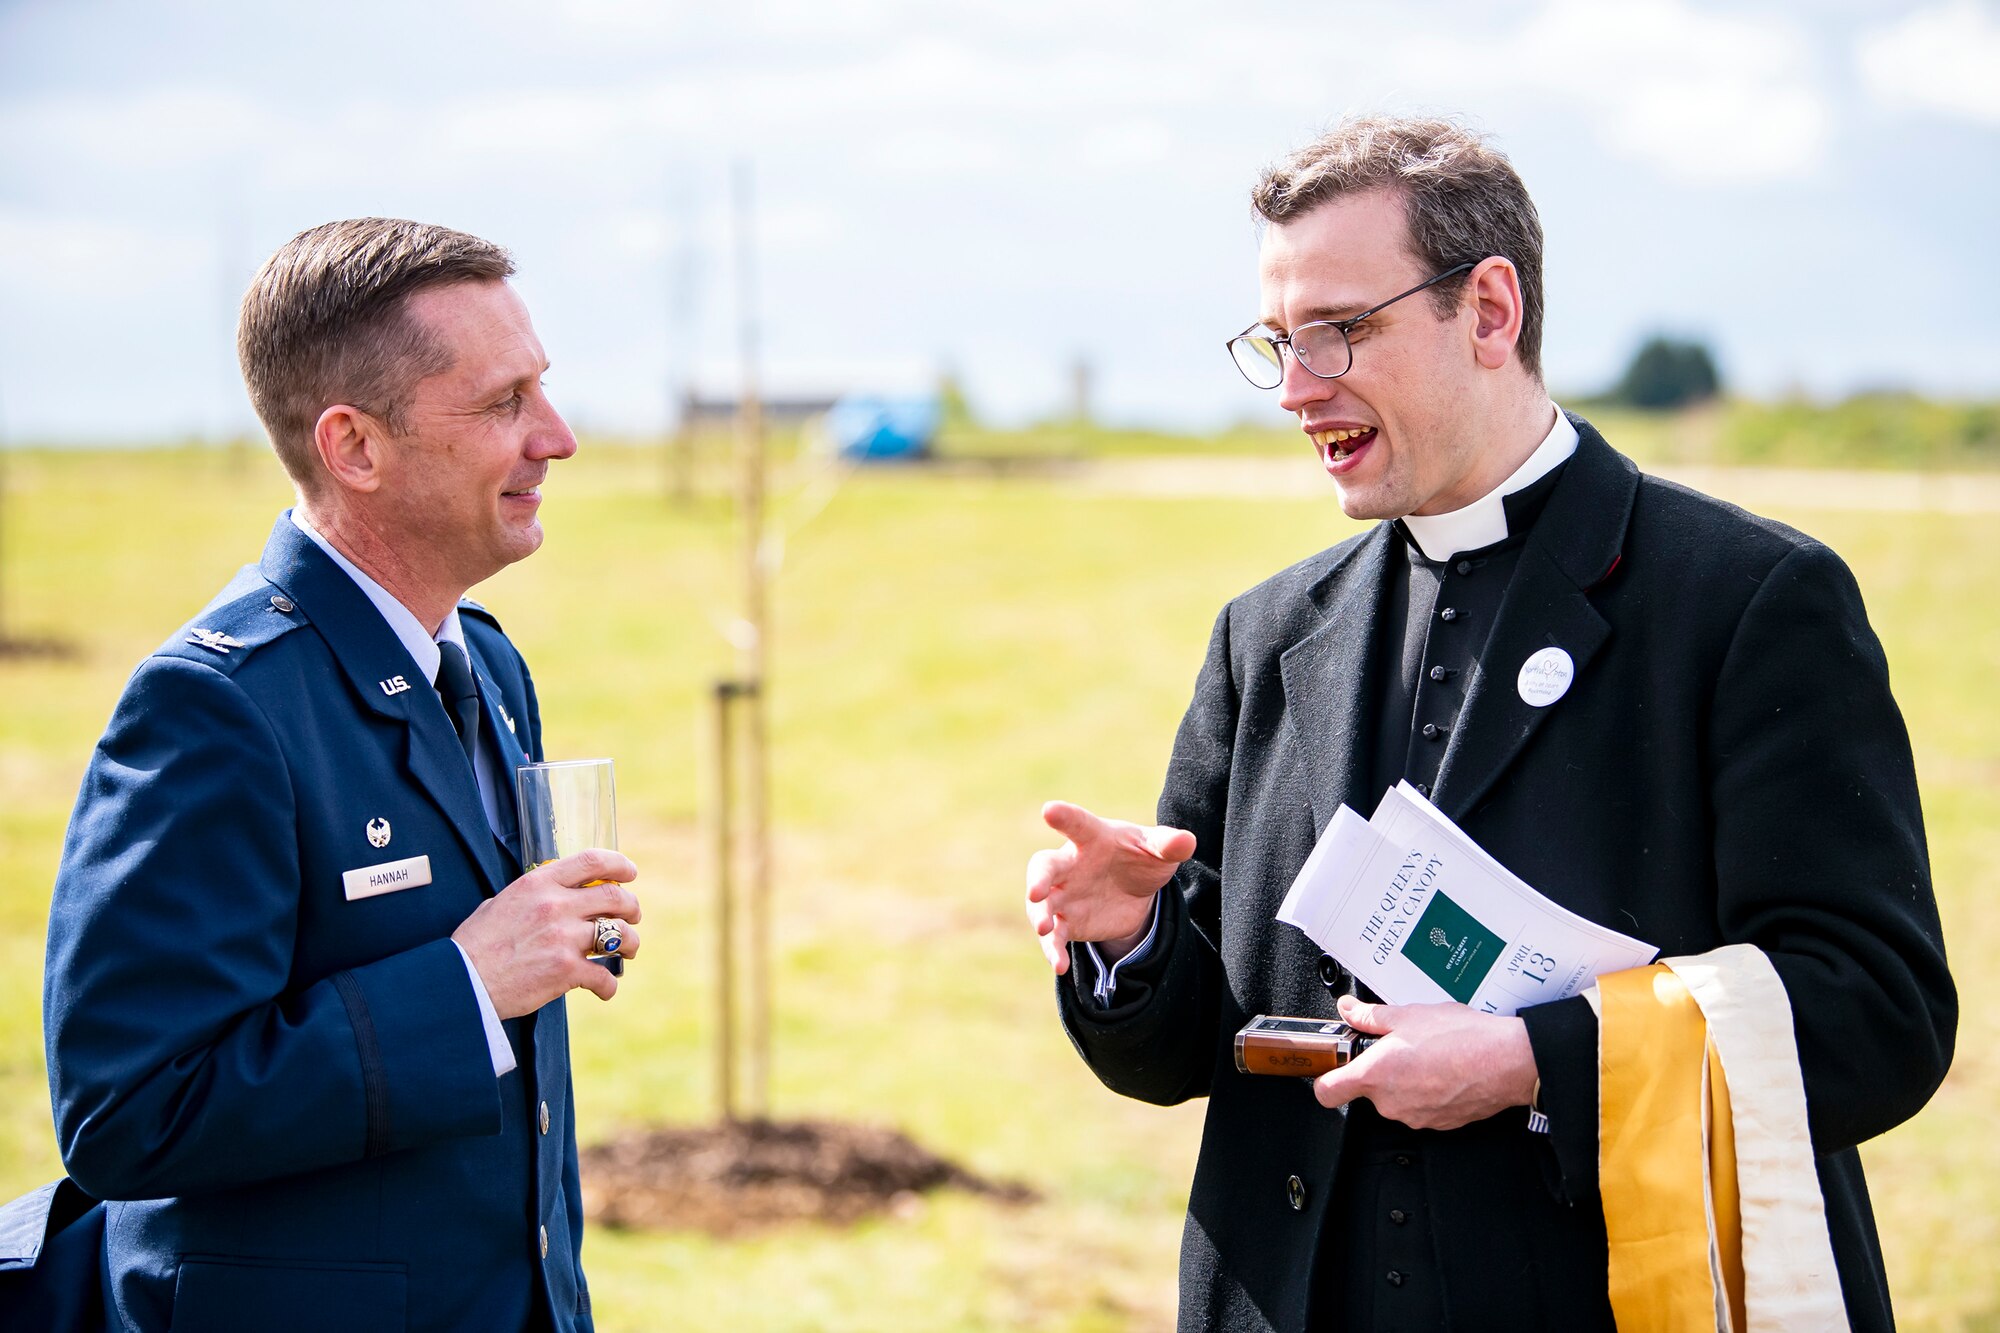 U.S. Air Force Col. Jon T. Hannah, left, 422d Air Base Group commander, speaks with Father Oliver Coss, Rector of All Saints’ Church, Northampton, prior to the Queen’s Green Canopy event at RAF Croughton, England, April 13, 2022. The event celebrated the Queen’s Platinum Jubilee initiative, marking the 70th year of her reign. During the event, trees were planted to create a legacy in honor of the queen’s leadership of the nation. (U.S. Air Force photo by Staff Sgt. Eugene Oliver)